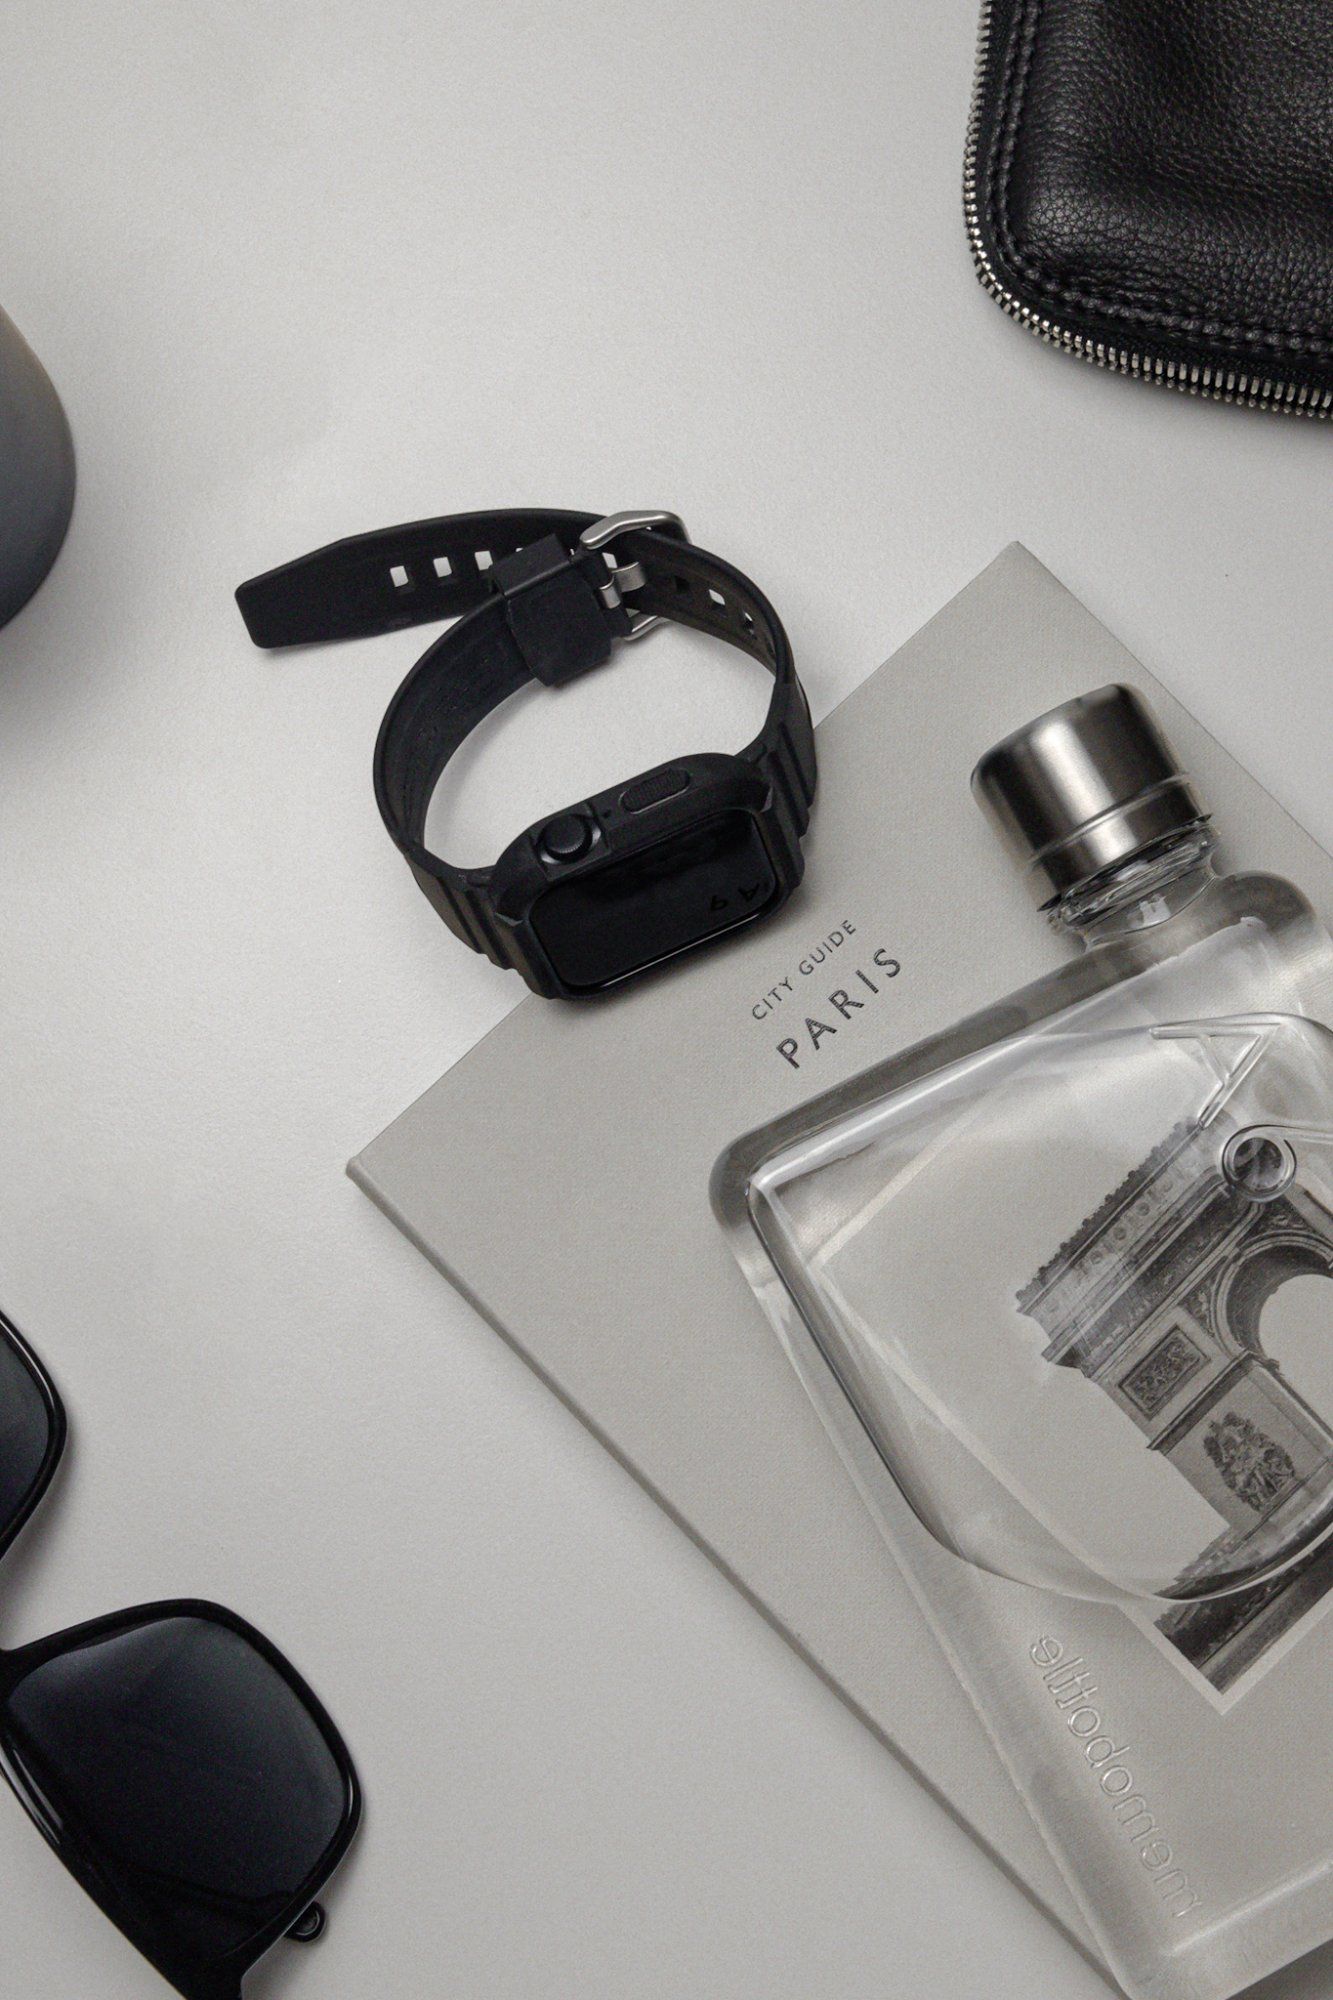 A Paris city guide, sunglasses, a watch, and a transparent reusable water bottle arranged neatly on a white desk